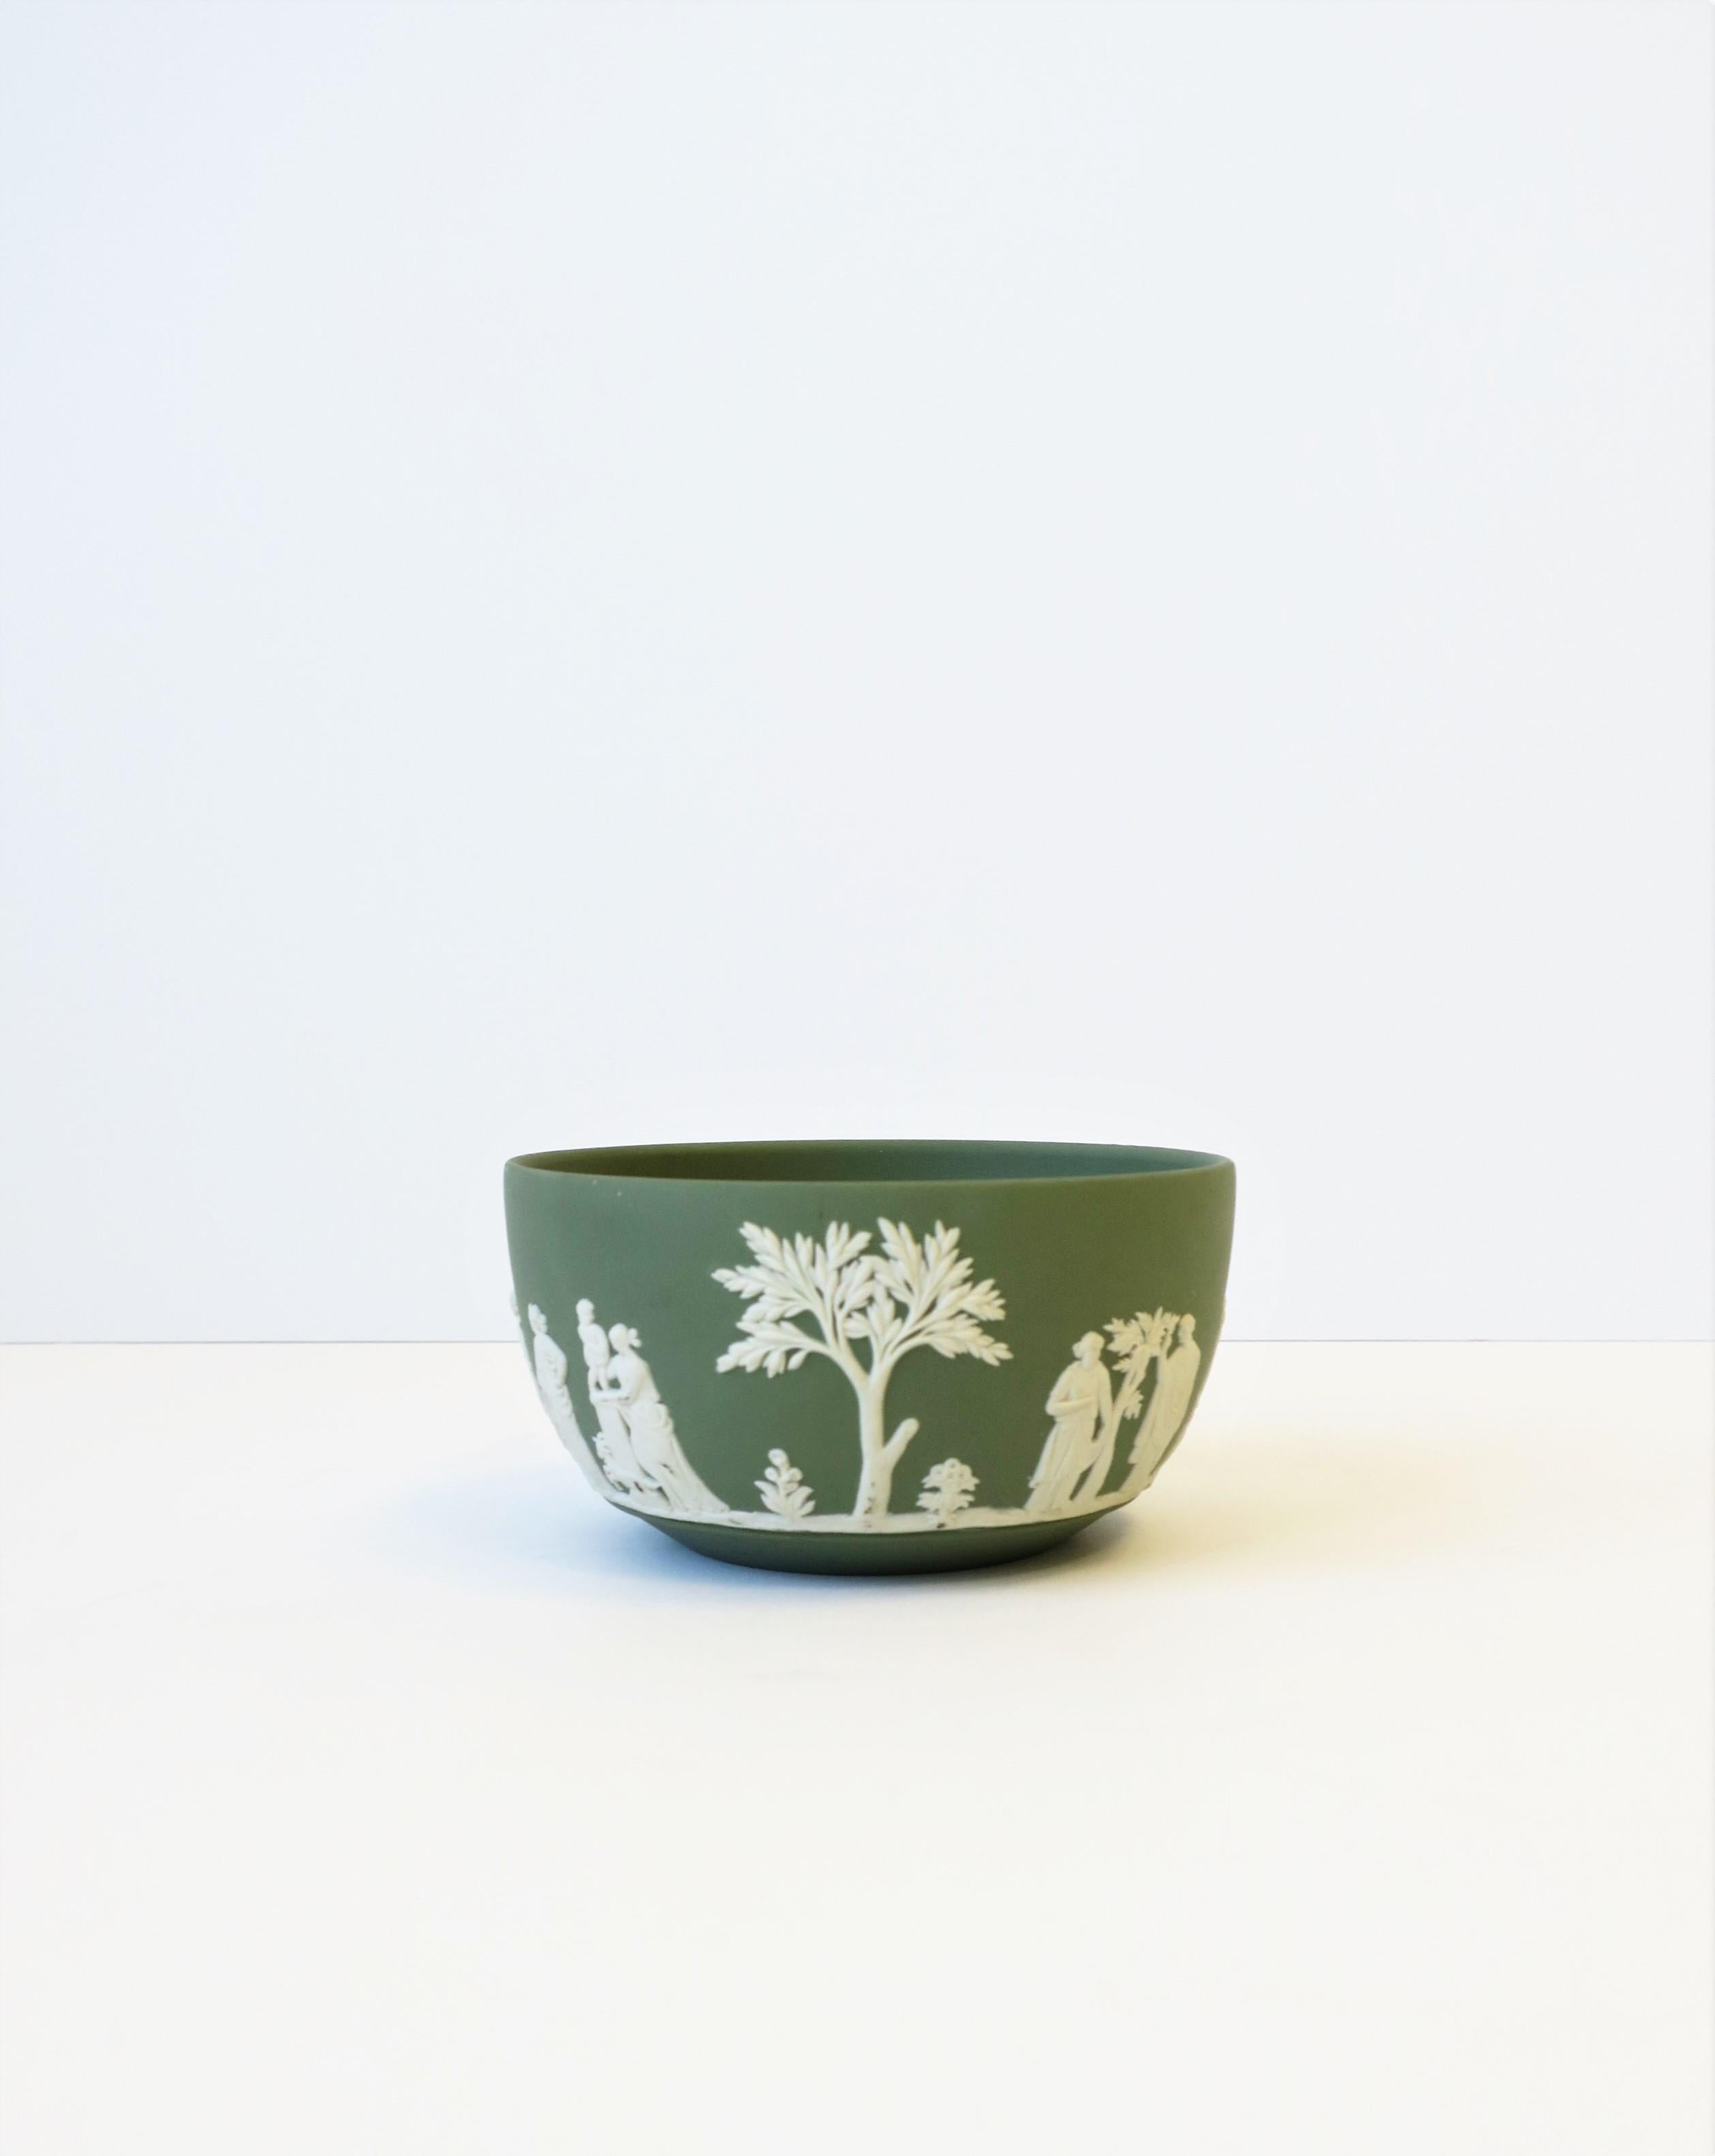 A beautiful English Wedgwood Jasperware sage green and white matte stoneware bowl, in the Neoclassical design style, circa mid- to late 20th century, England, 1973. Piece is a matte stoneware in a light green with a white neoclassical raised relief